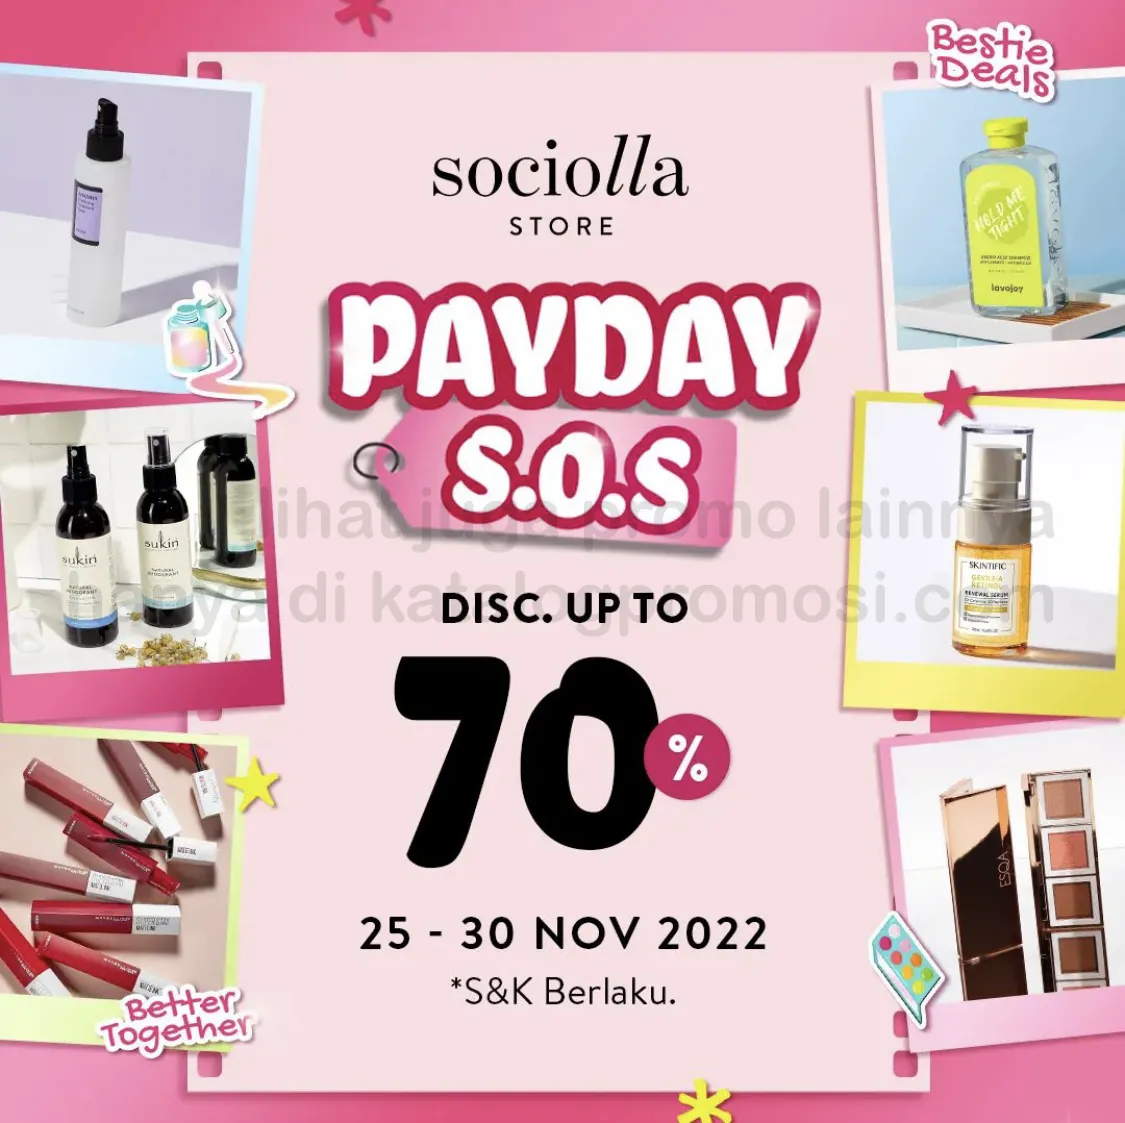 Promo Sociolla PAYDAY S.O.S Discount Up To 70% Off*